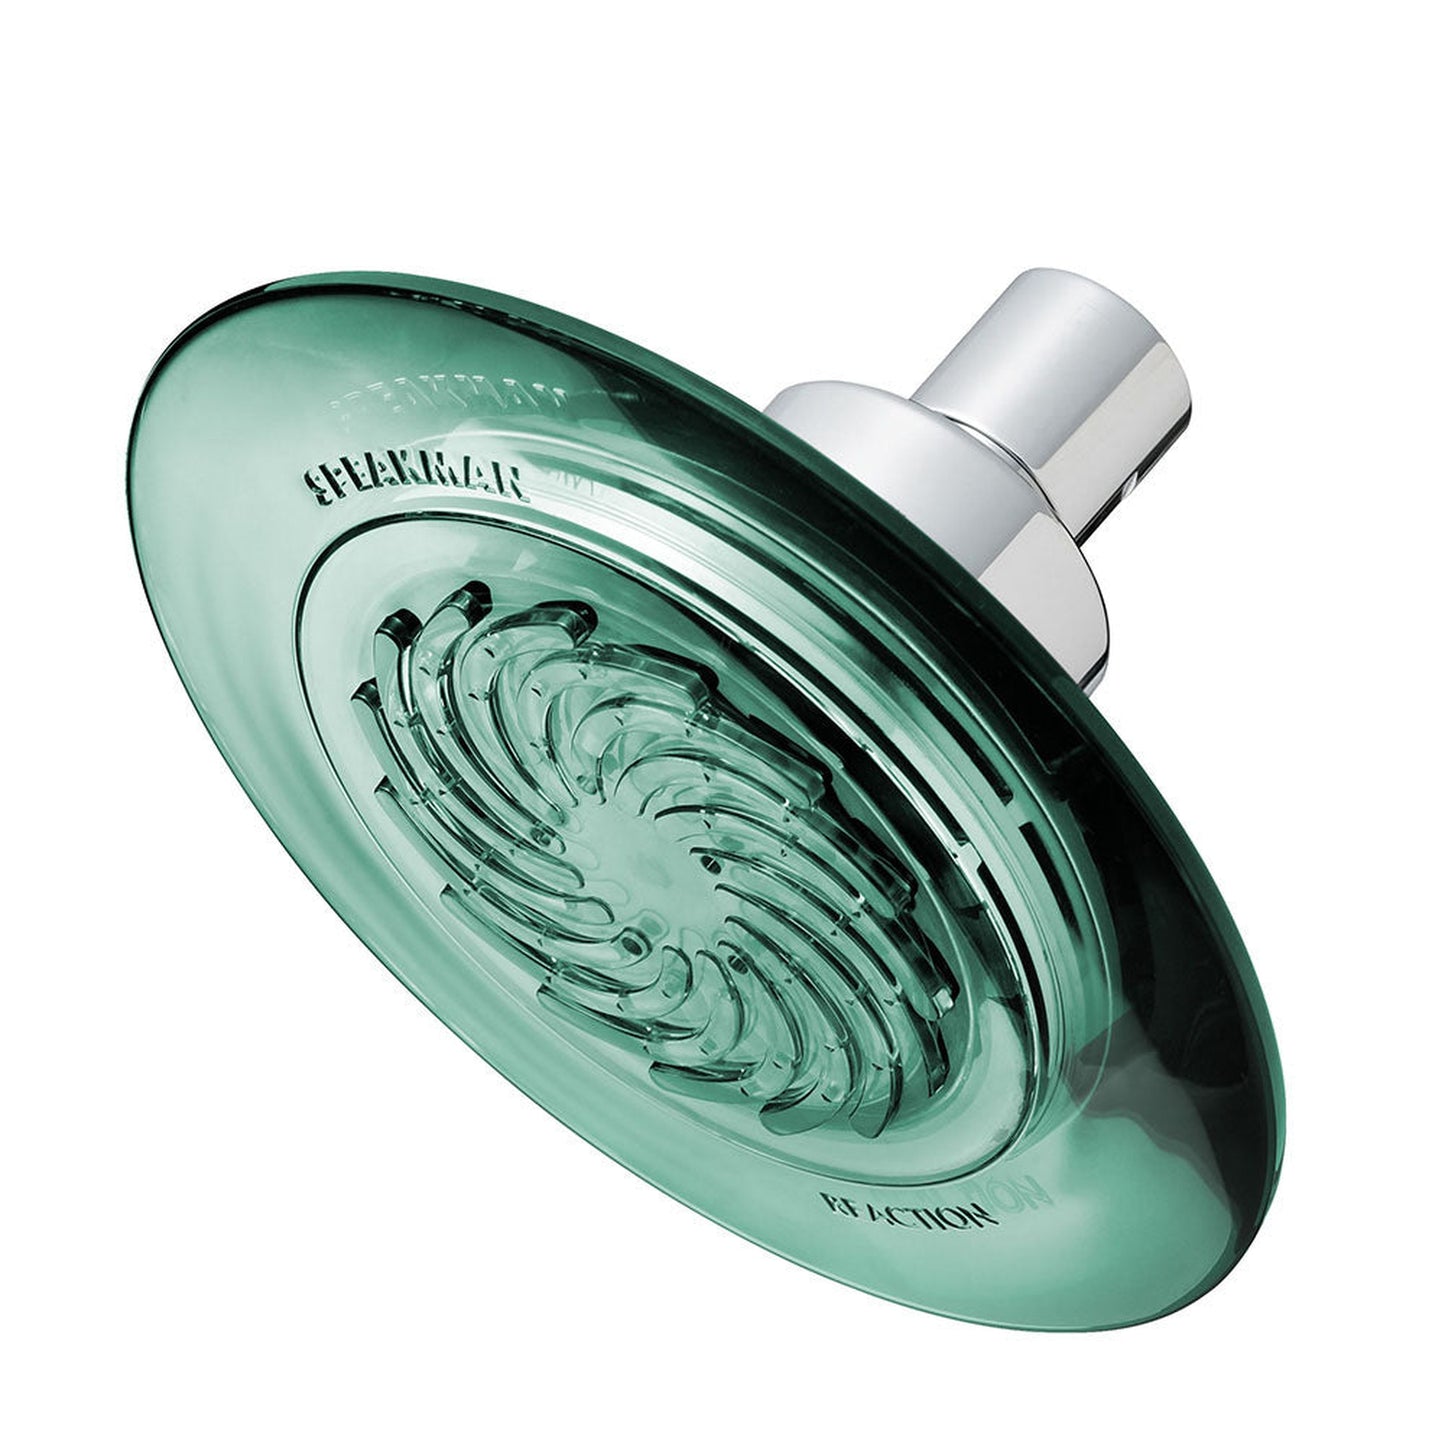 Speakman Reaction Single-Function Spray Pattern 2.5 GPM Shower Head in Polished Chrome Finish With Jade Green Frame